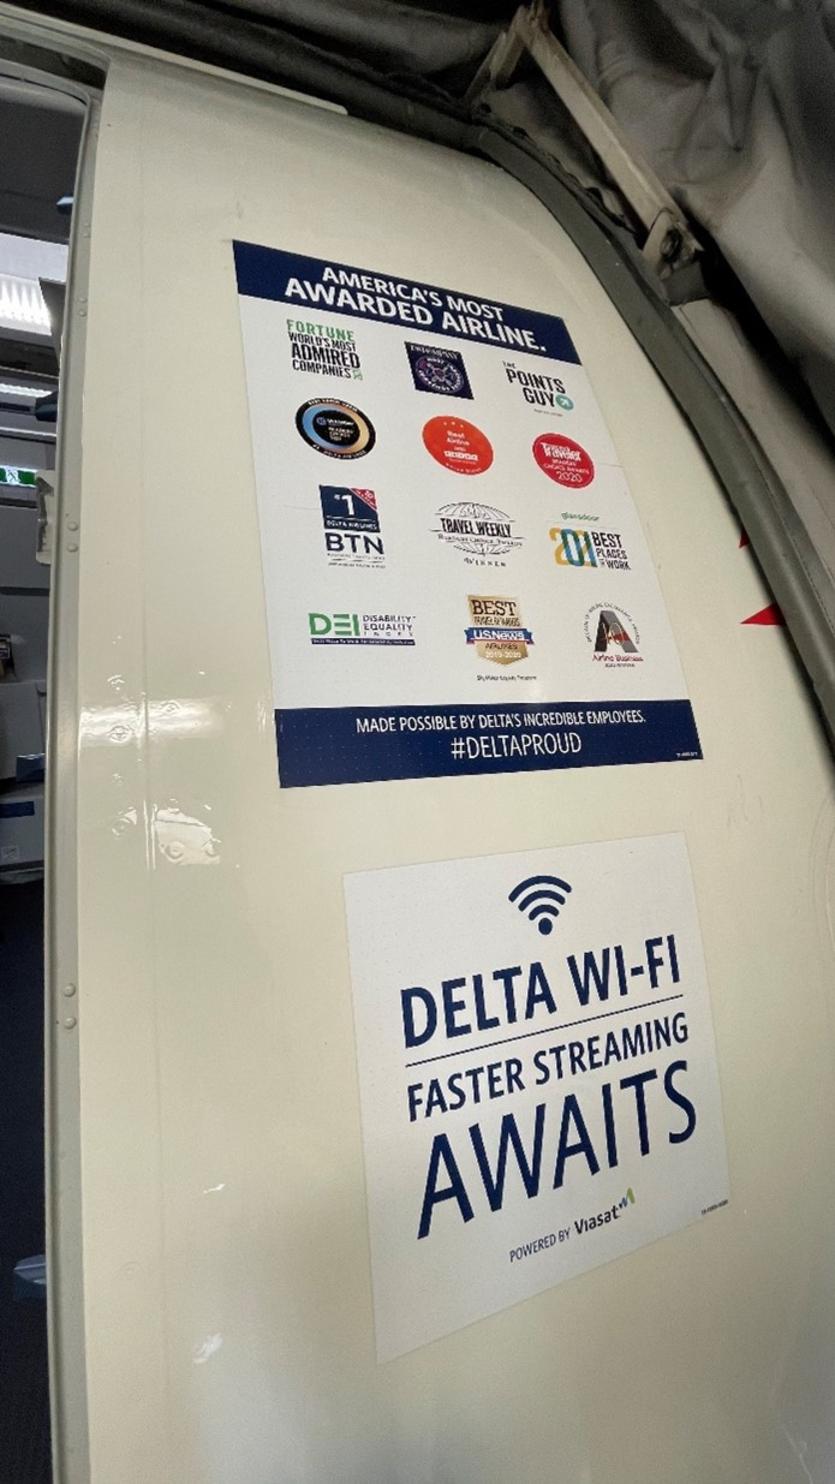 Customers on Viasat-equipped routes should look for a decal on their plane’s exterior upon boarding.